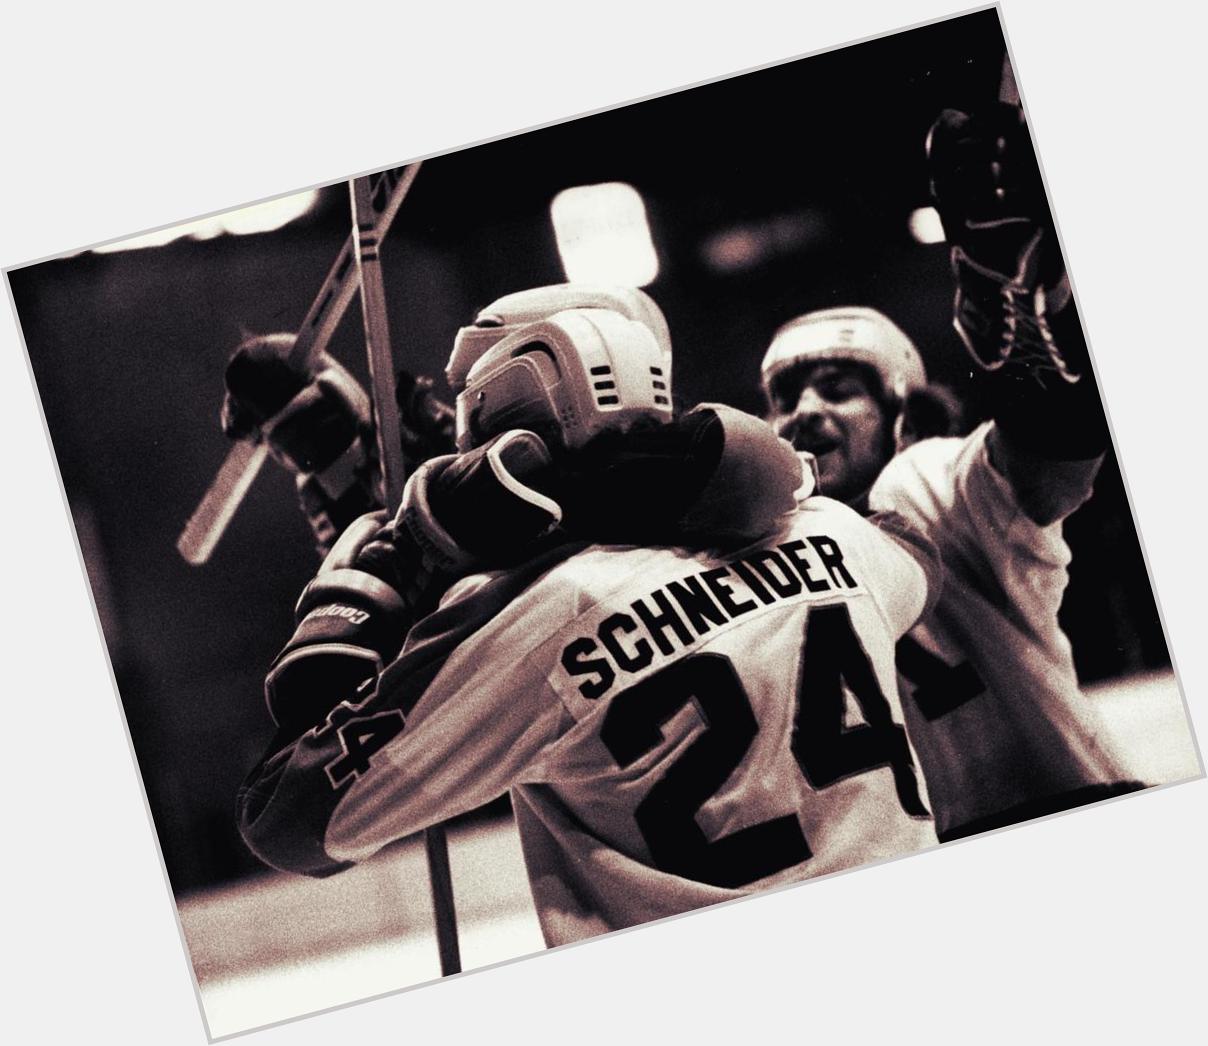 Happy 61st birthday today to former Miracle On Ice, & WHA forward - Buzz Schneider born in Babbitt, MN 